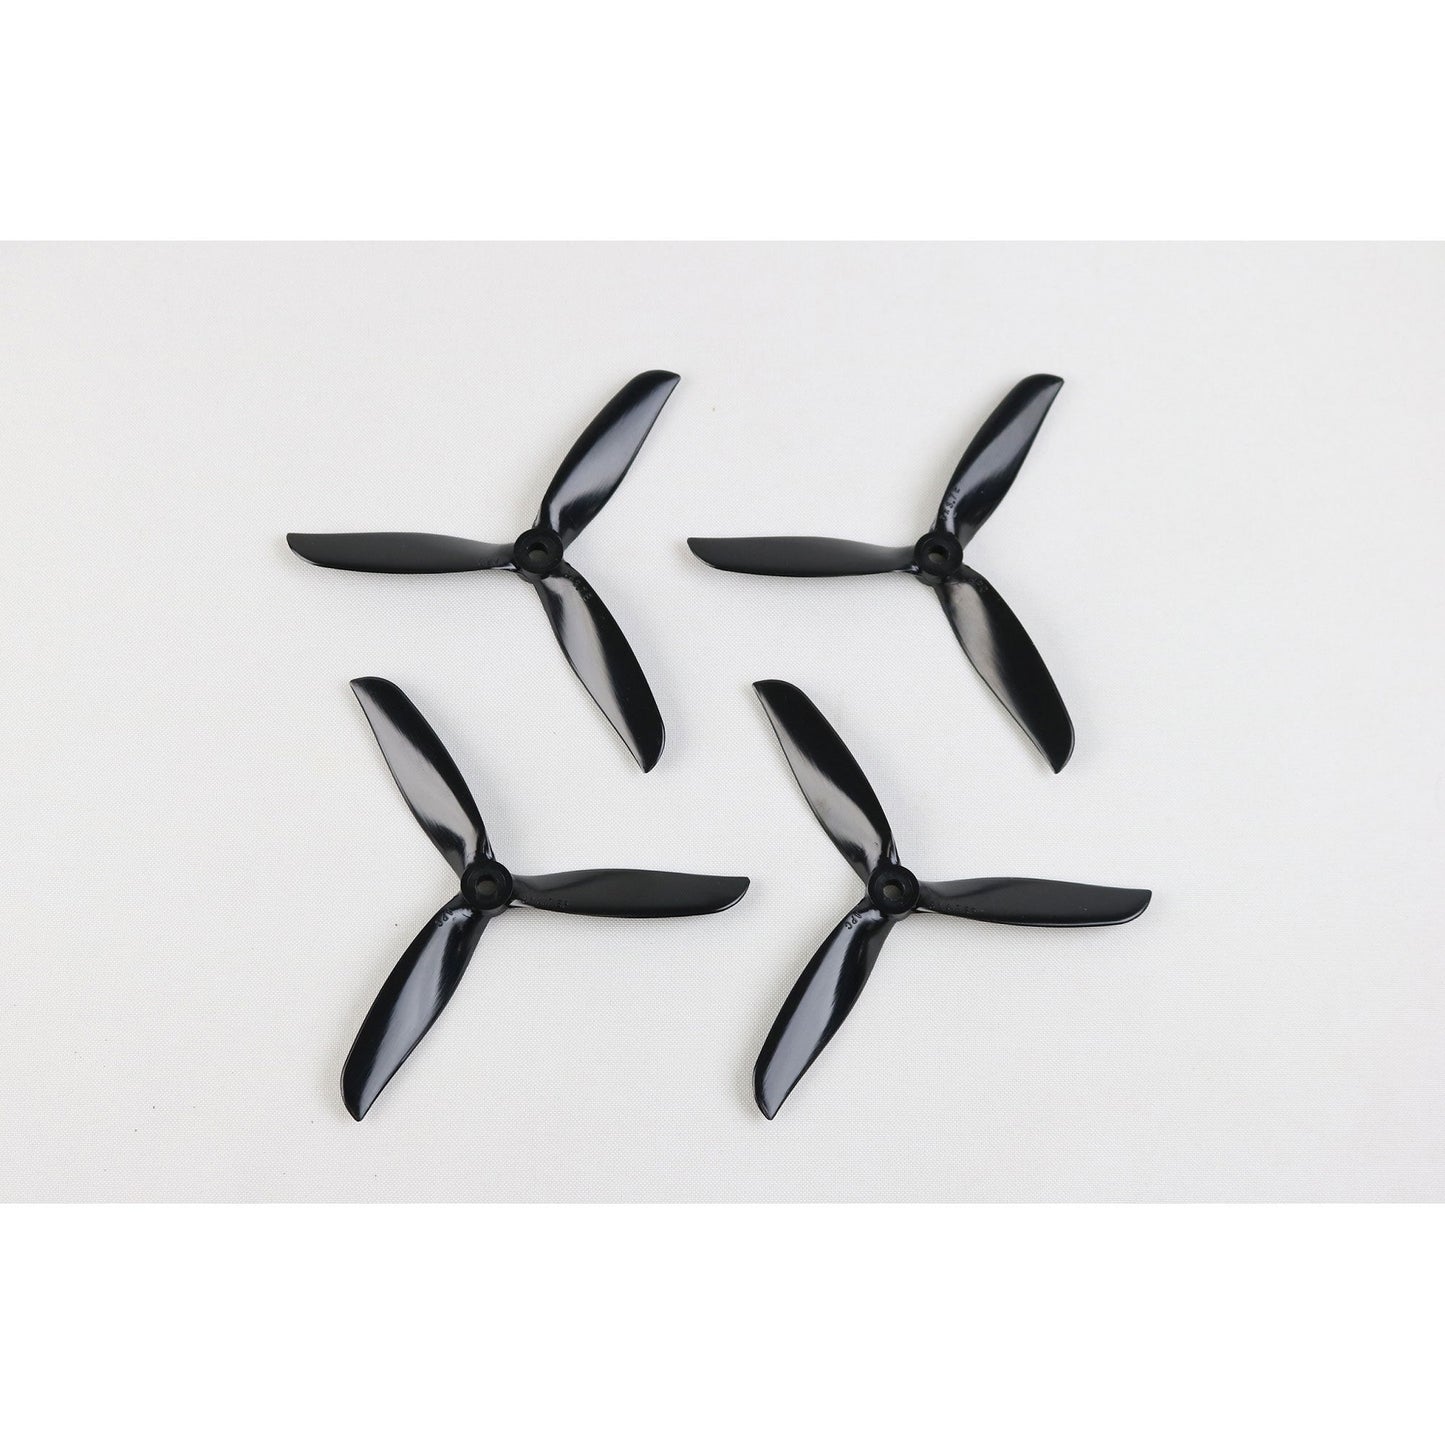 3 Blade Durable FPV Racing Bundle 5 x 3.7 E and EP, Black (2 Fwd, 2 Rev) - Dirt Cheap RC SAVING YOU MONEY, ONE PART AT A TIME